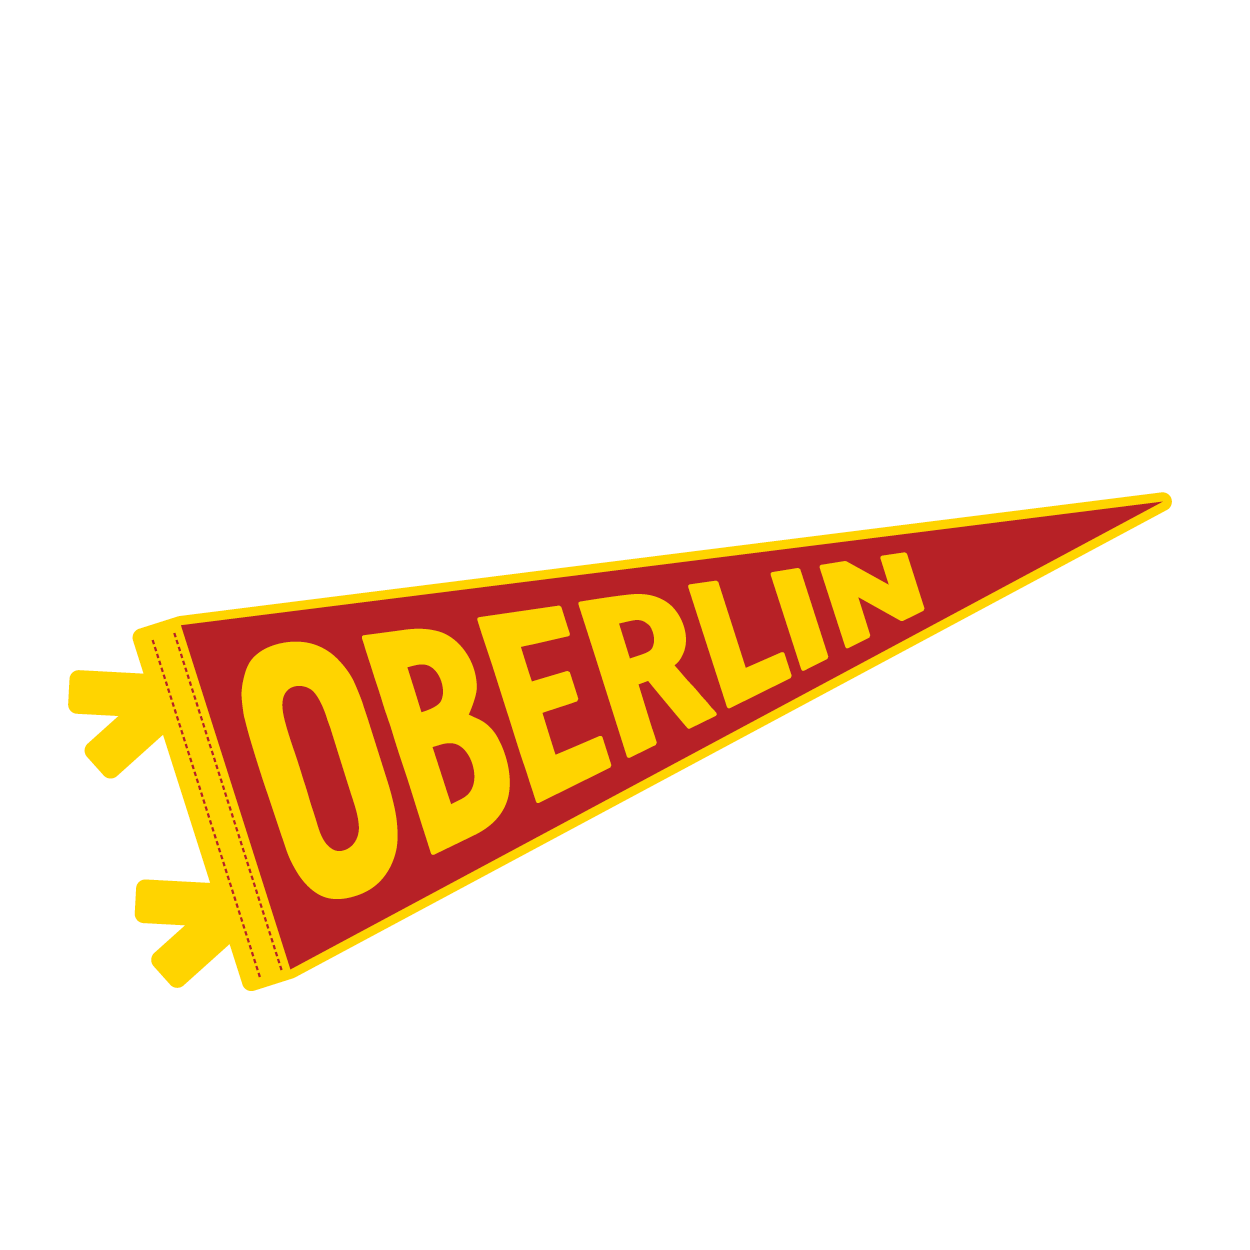 Oberlin pennant with animated motion.